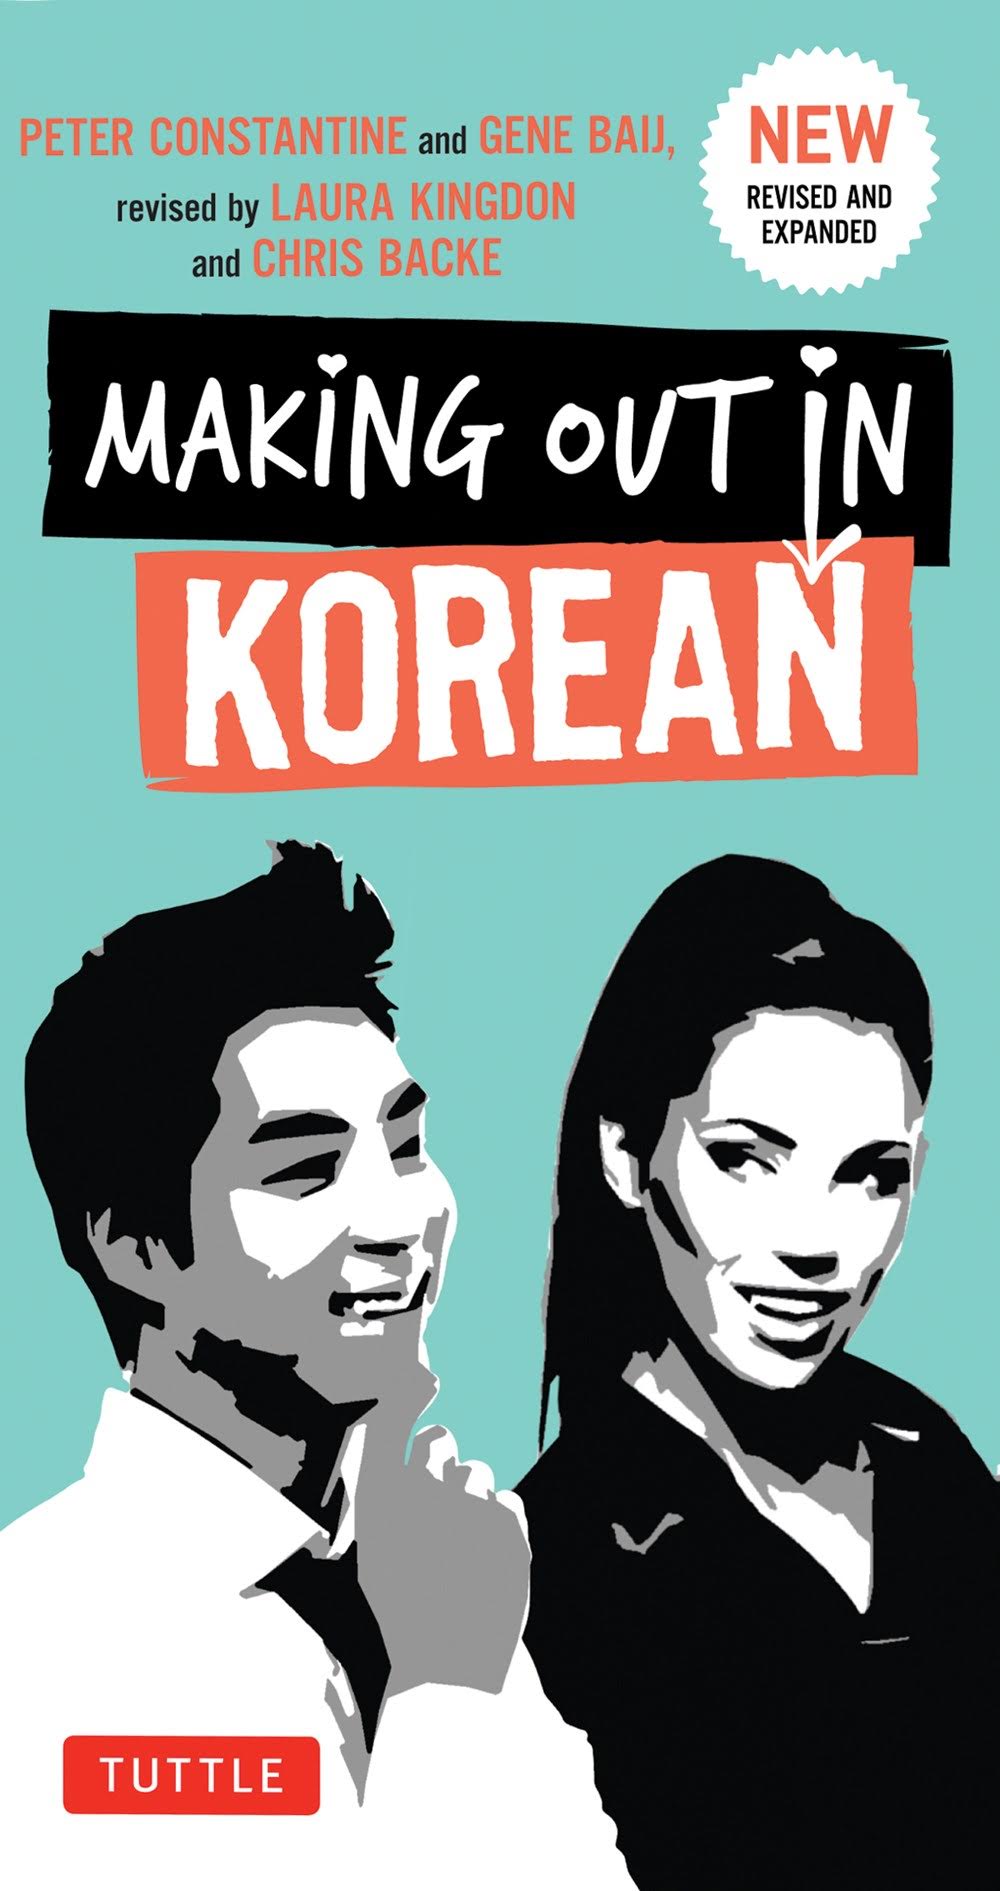 Making Out In Korean